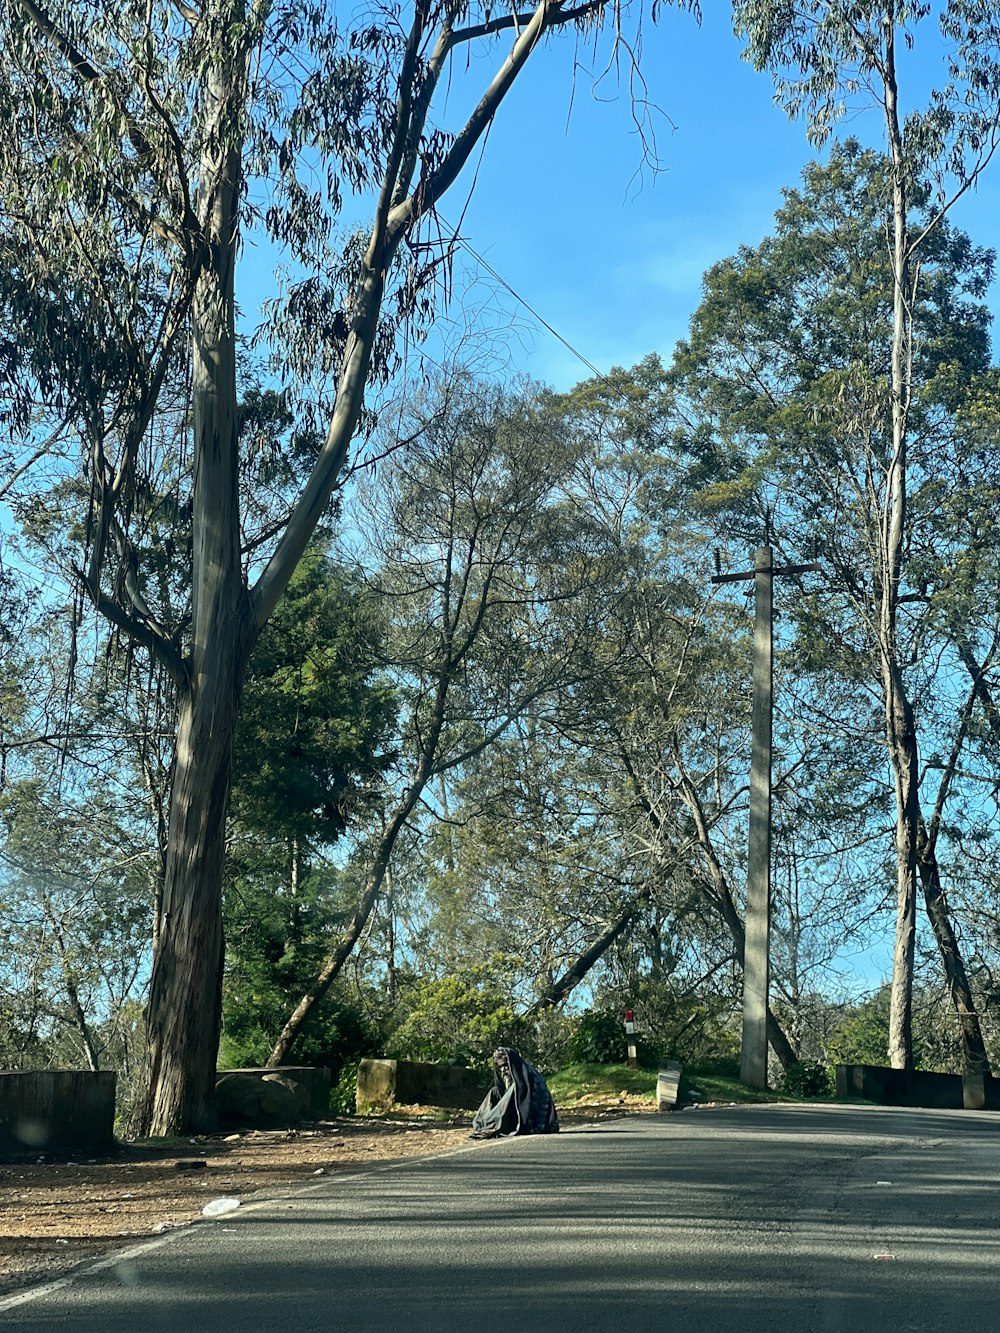 a man riding a motorcycle down a street next to tall trees